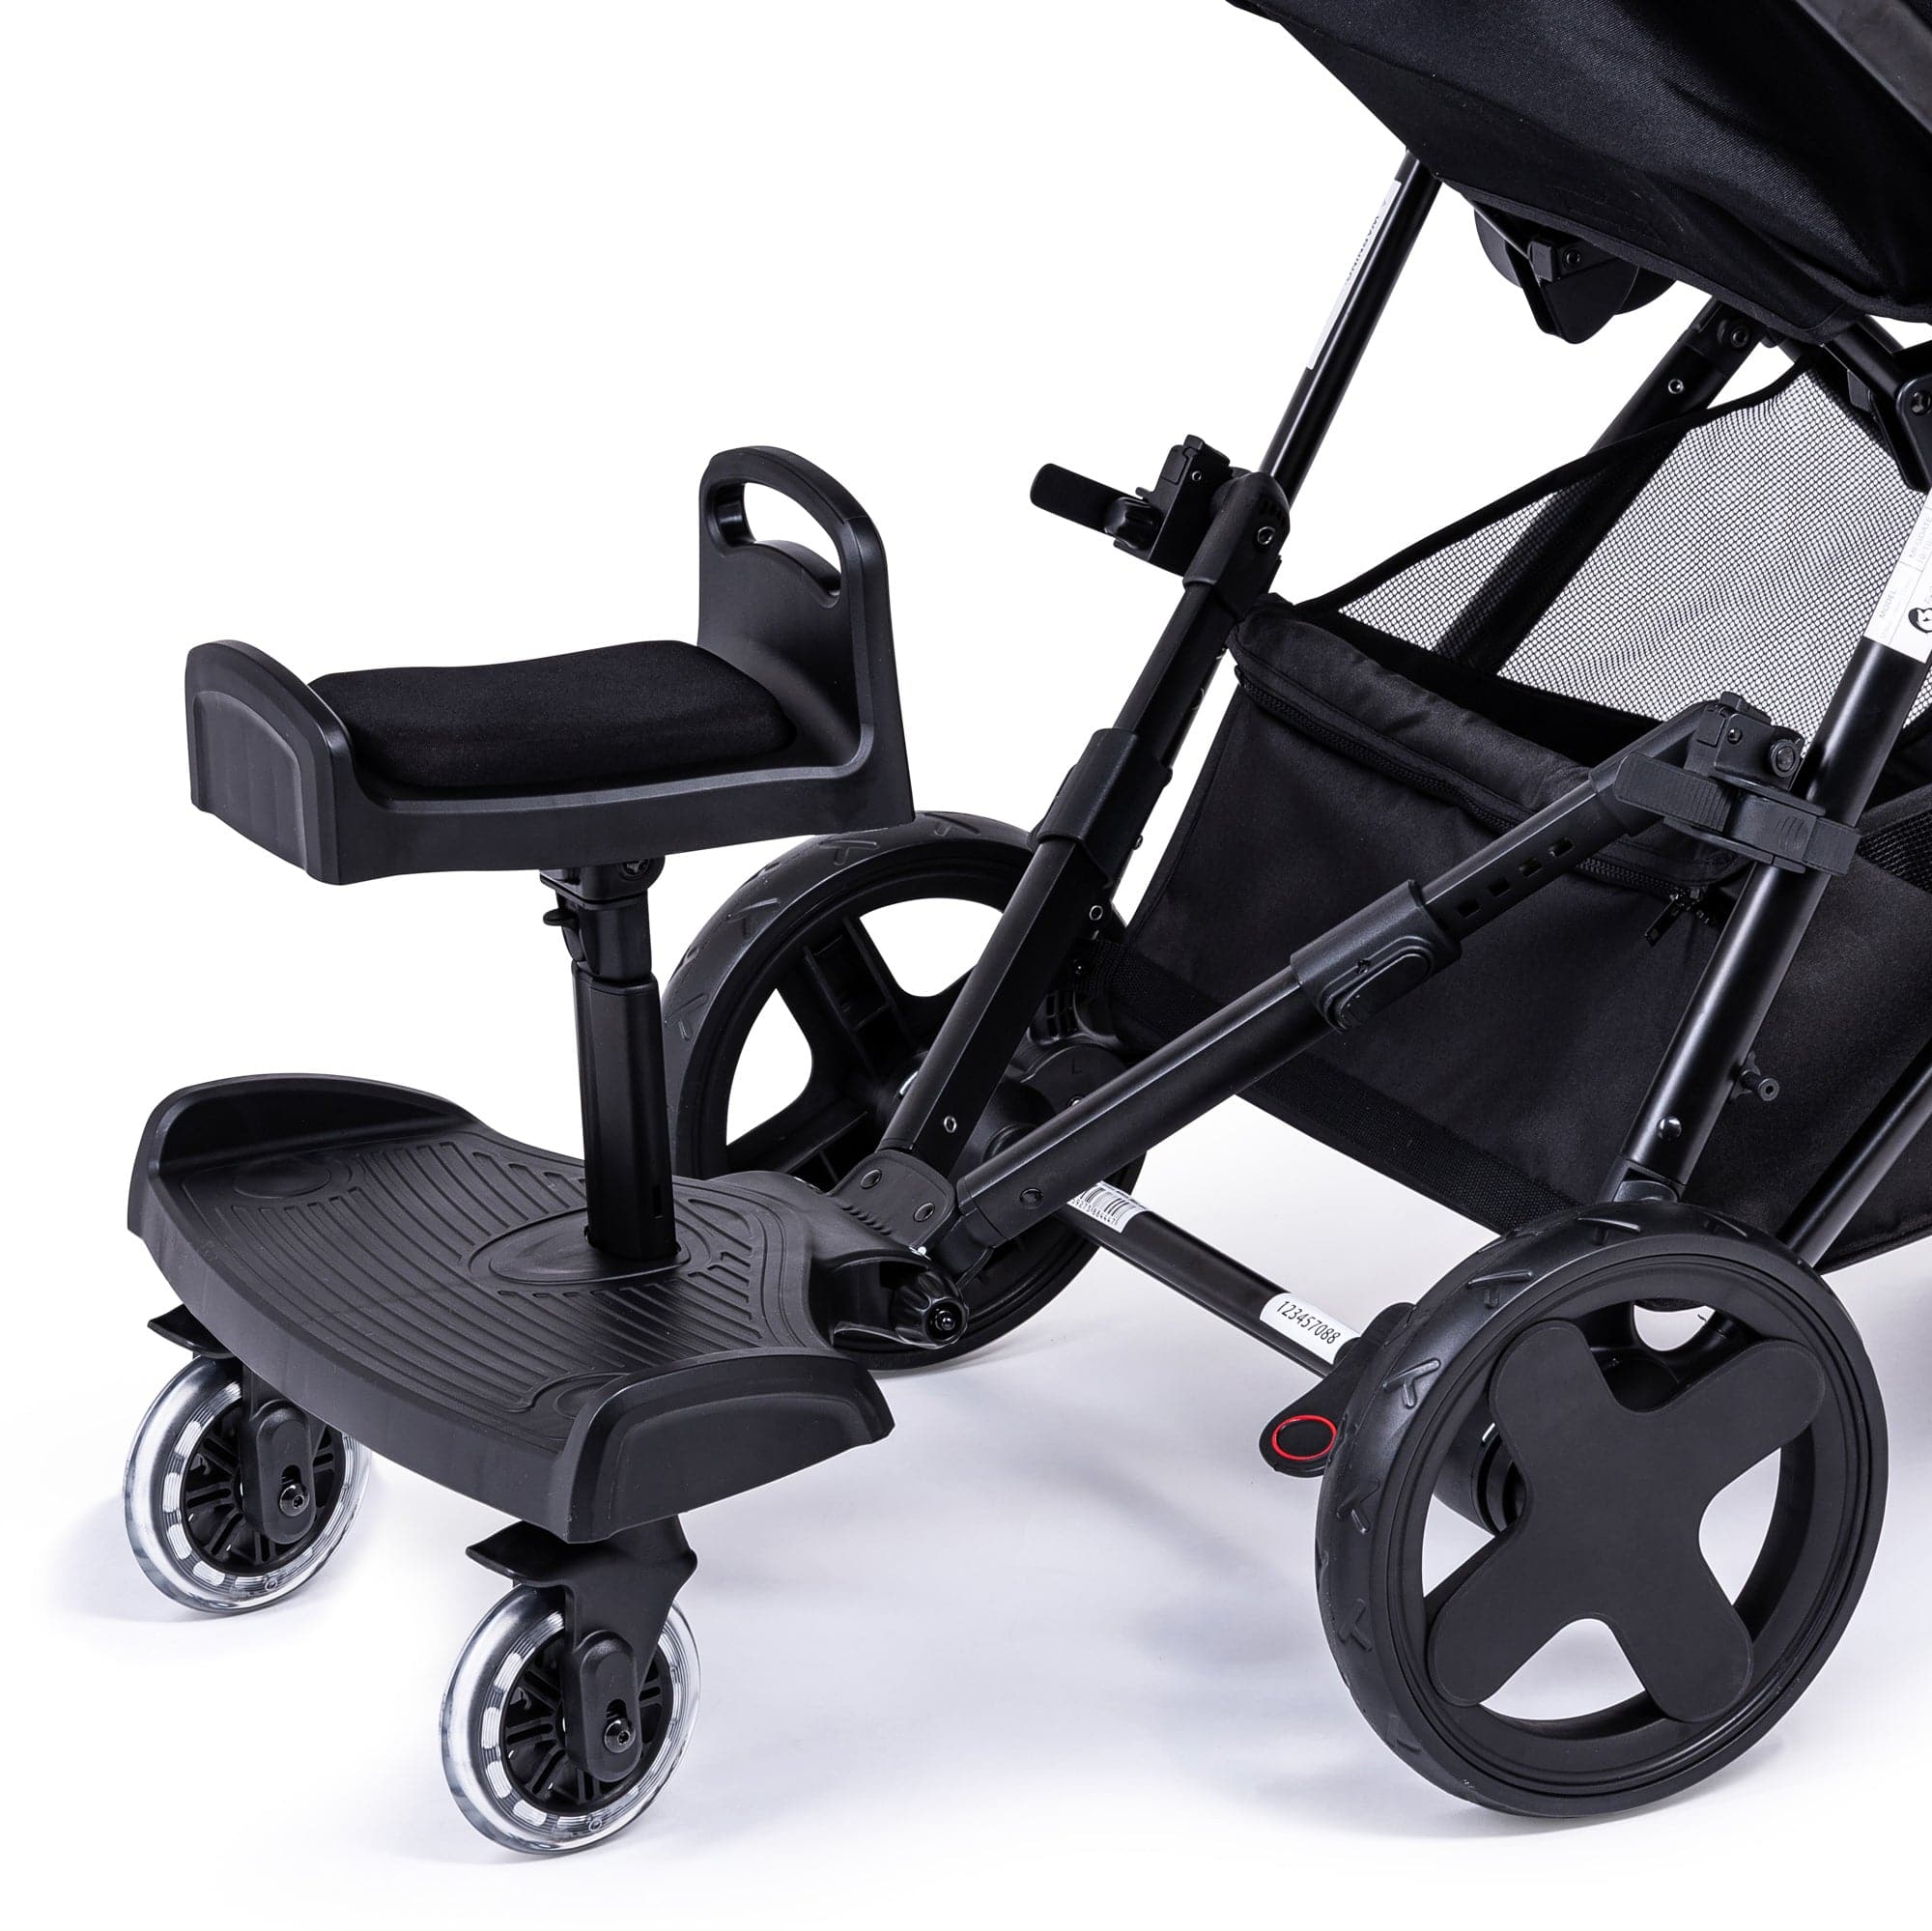 Ride On Board with Seat Compatible with Brevi - For Your Little One